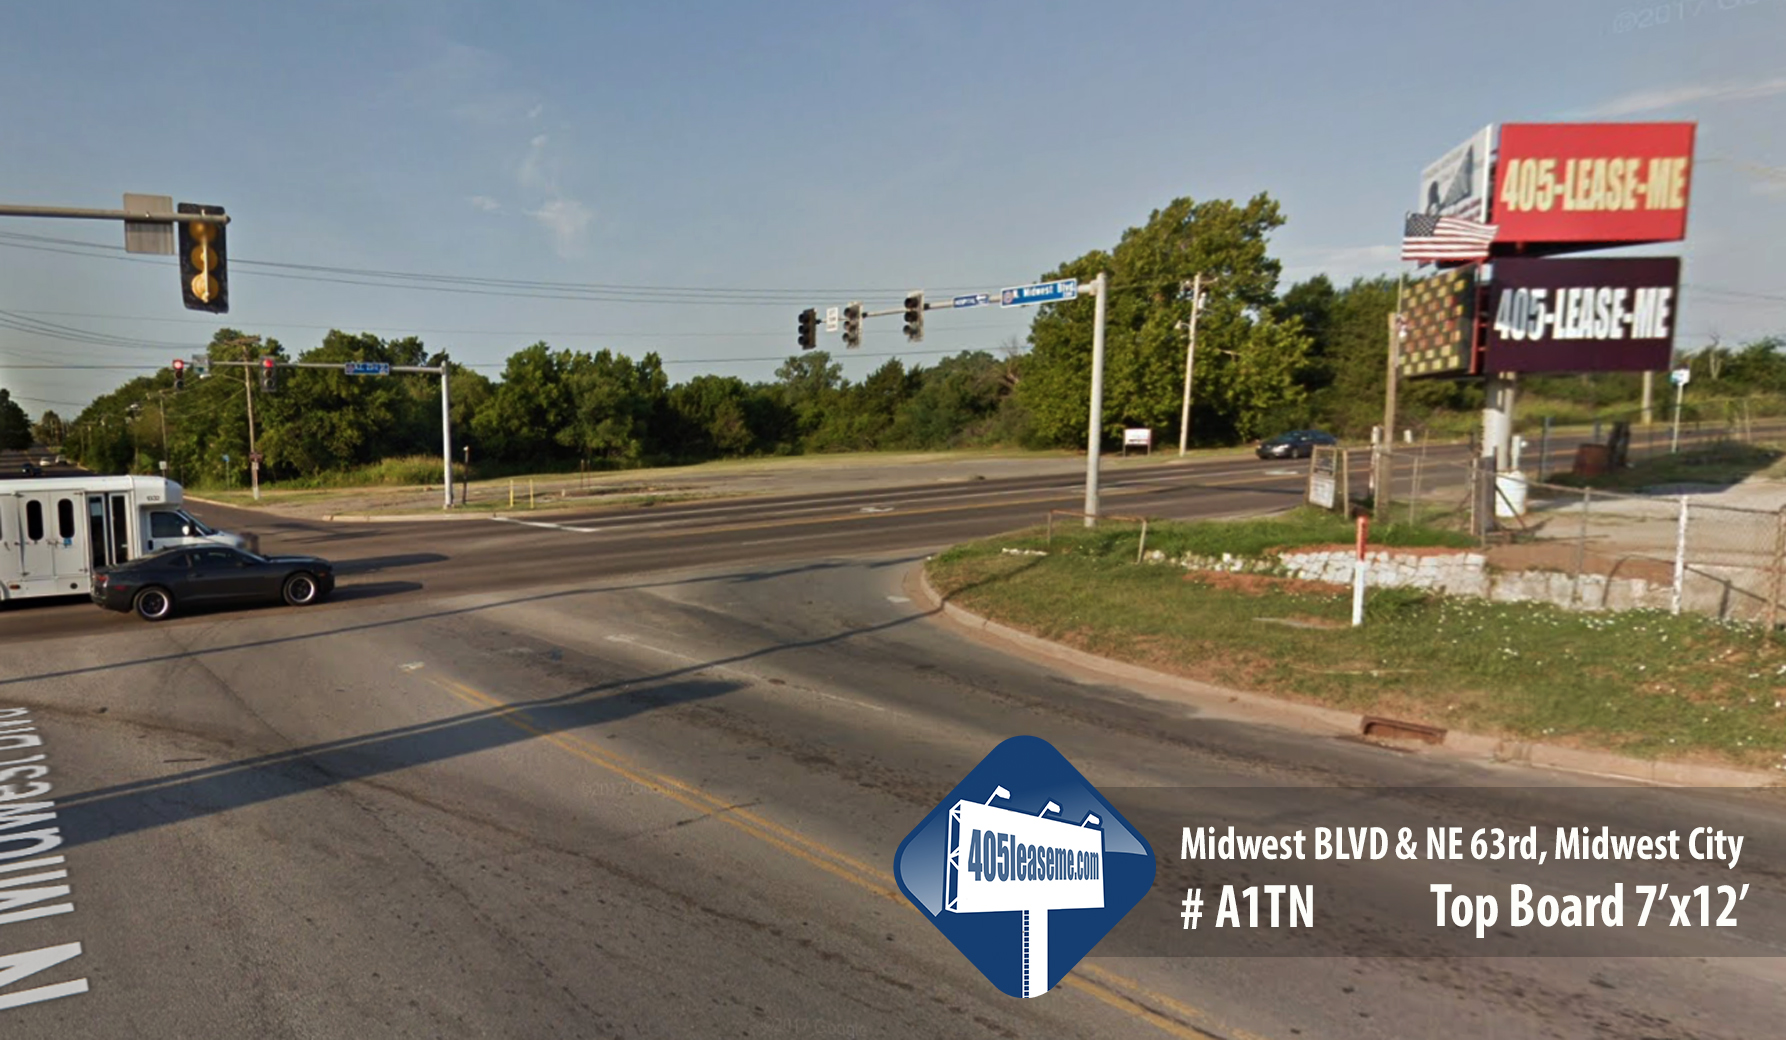 2 Midwest City - A1TN